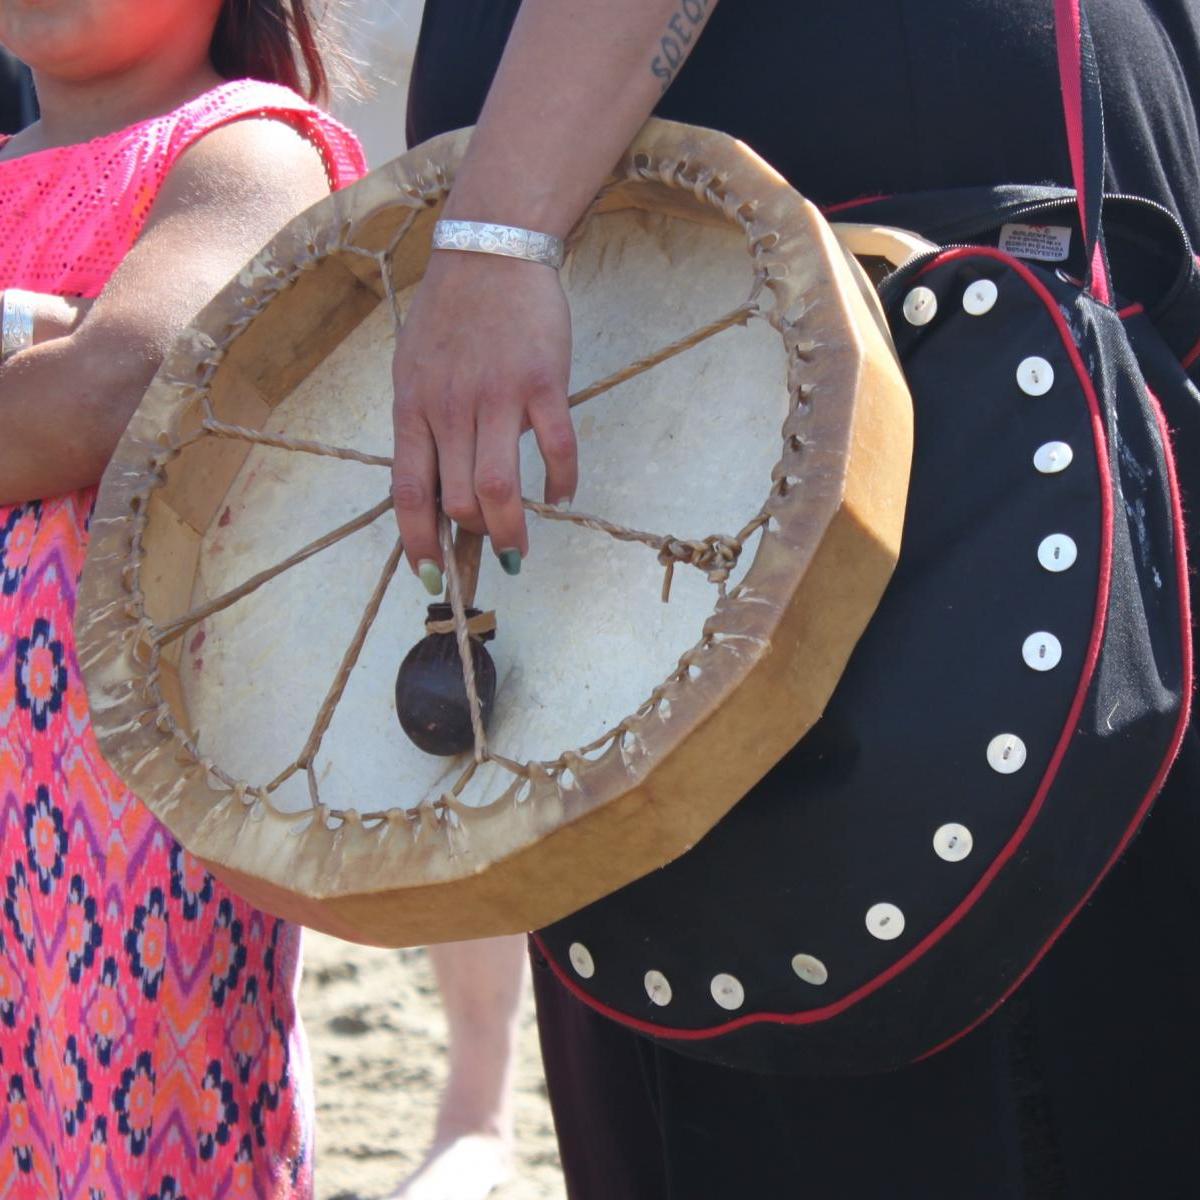 Indigenous woman holding a drum, a young Indigenous girl standing nearby